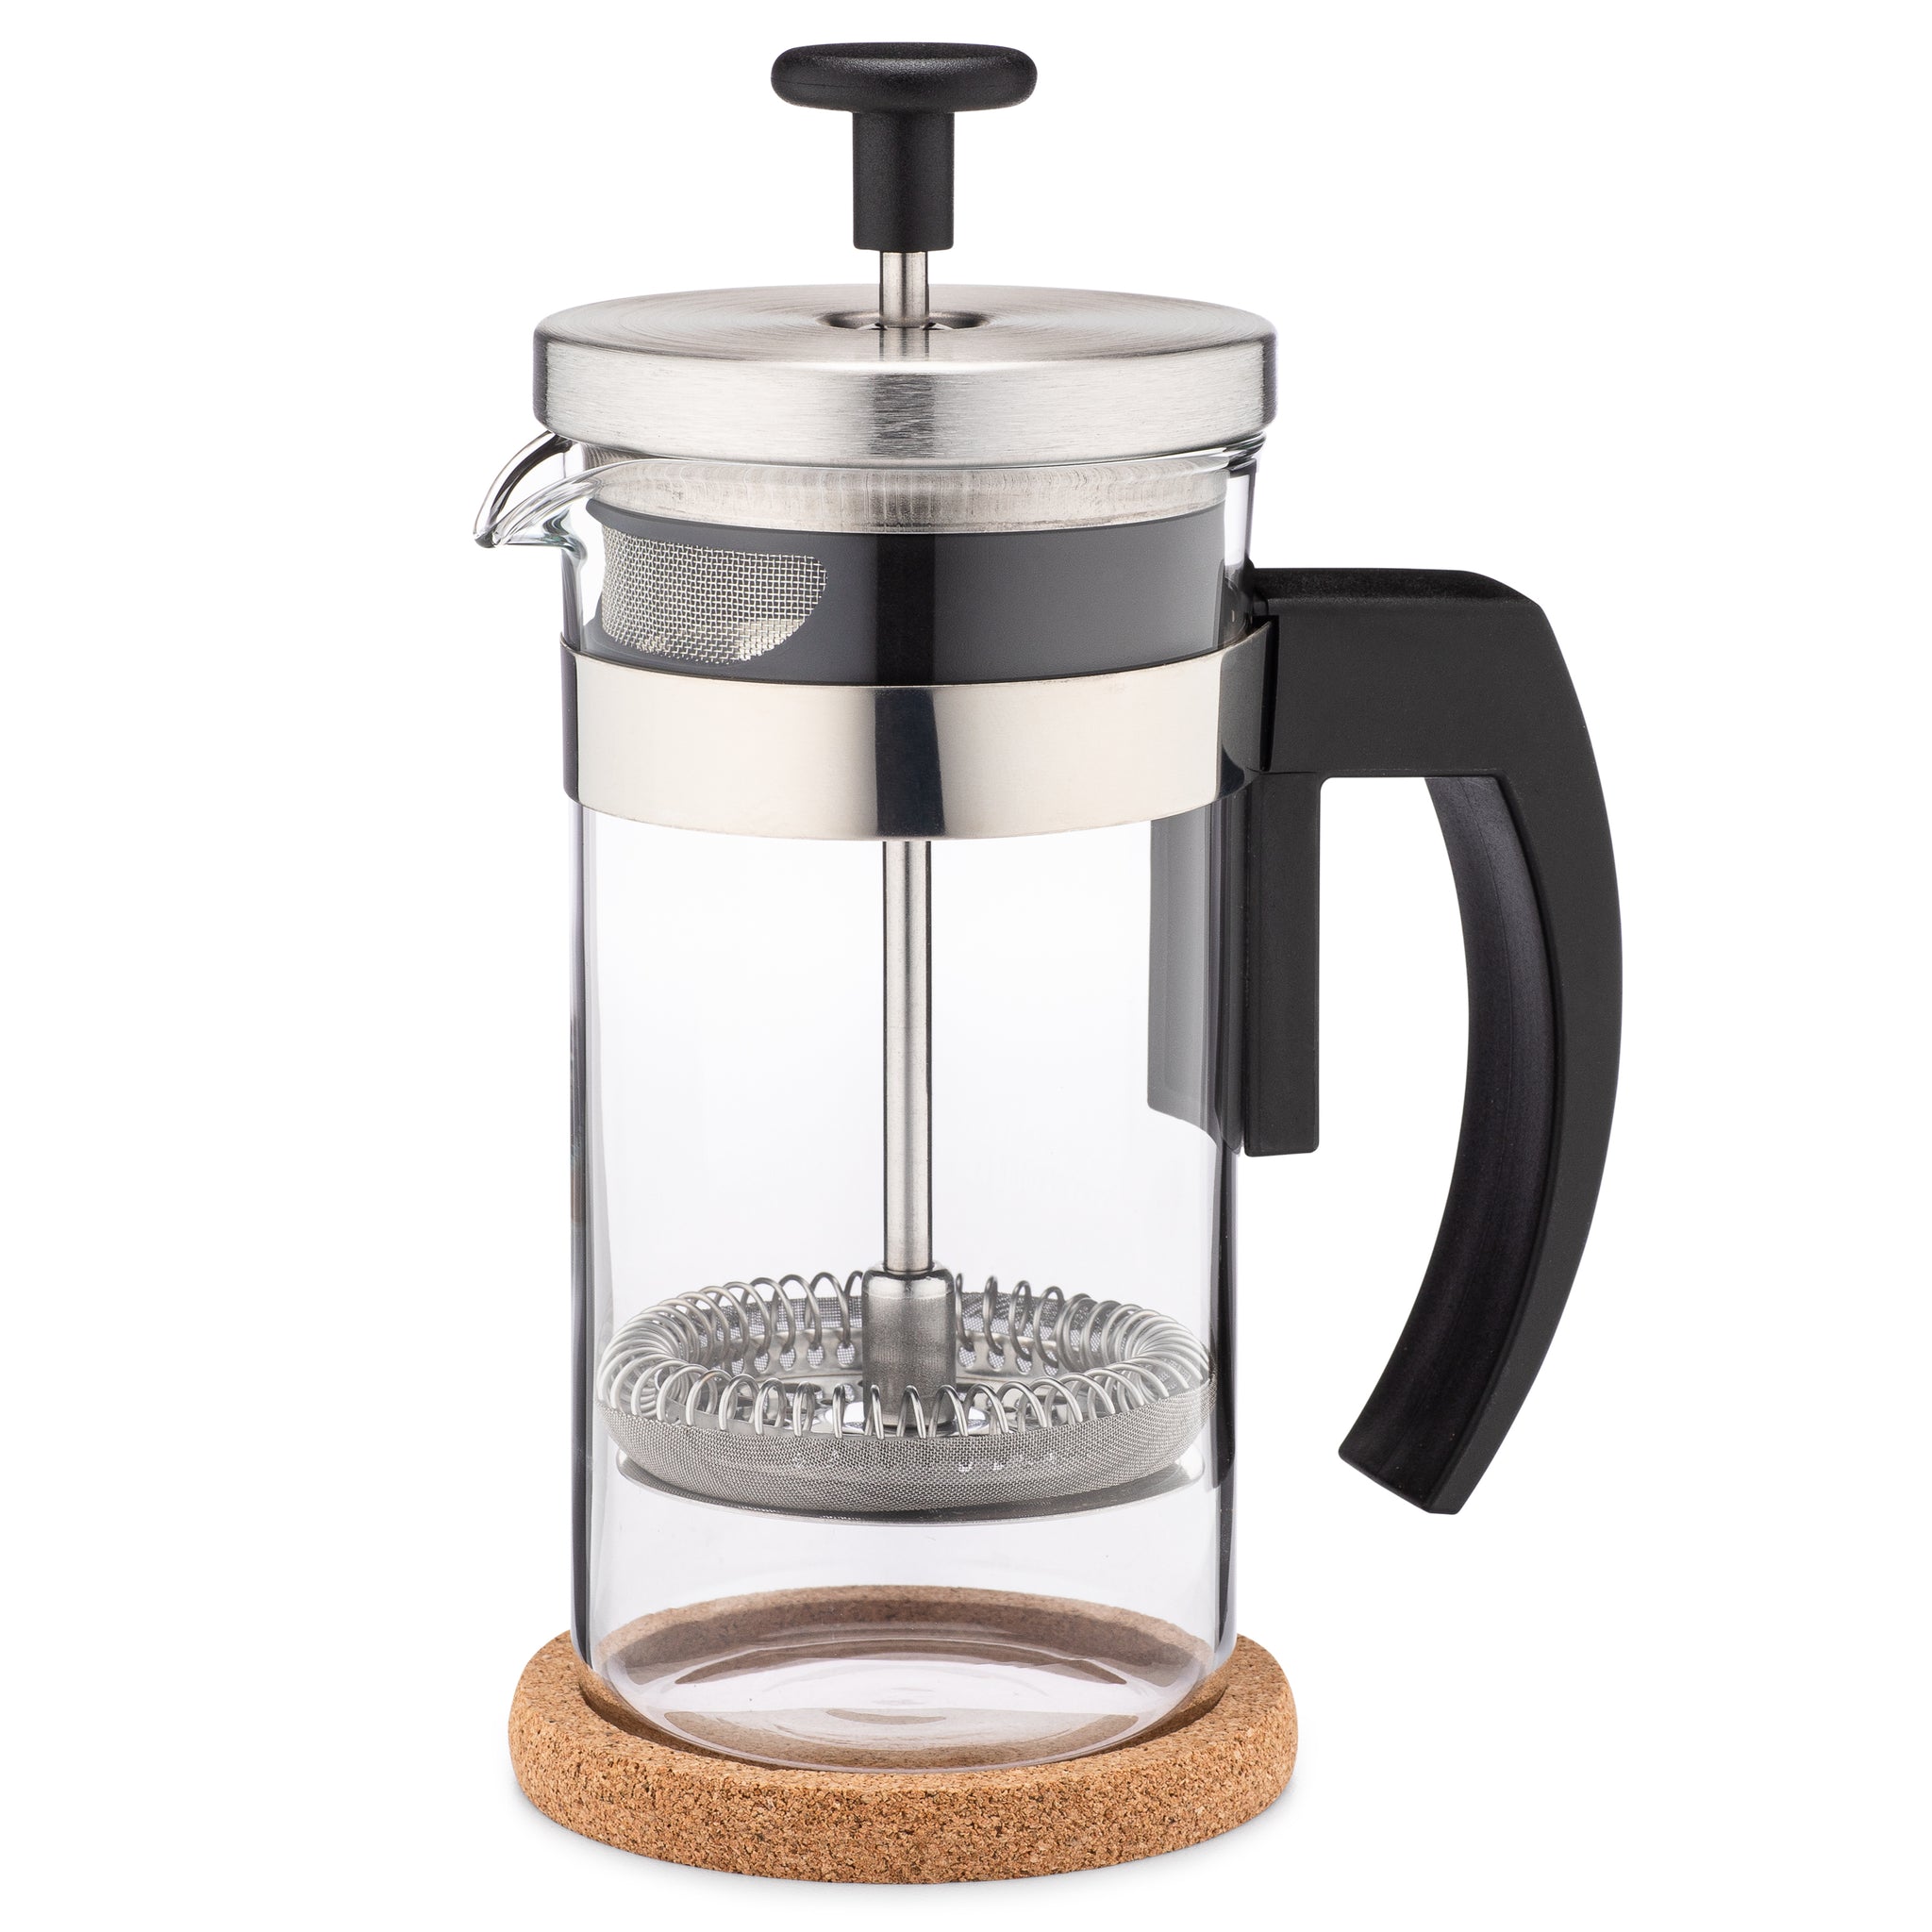 Upscale large 350ml Coffee French Press Plunger Coffee Maker Brewer Pot